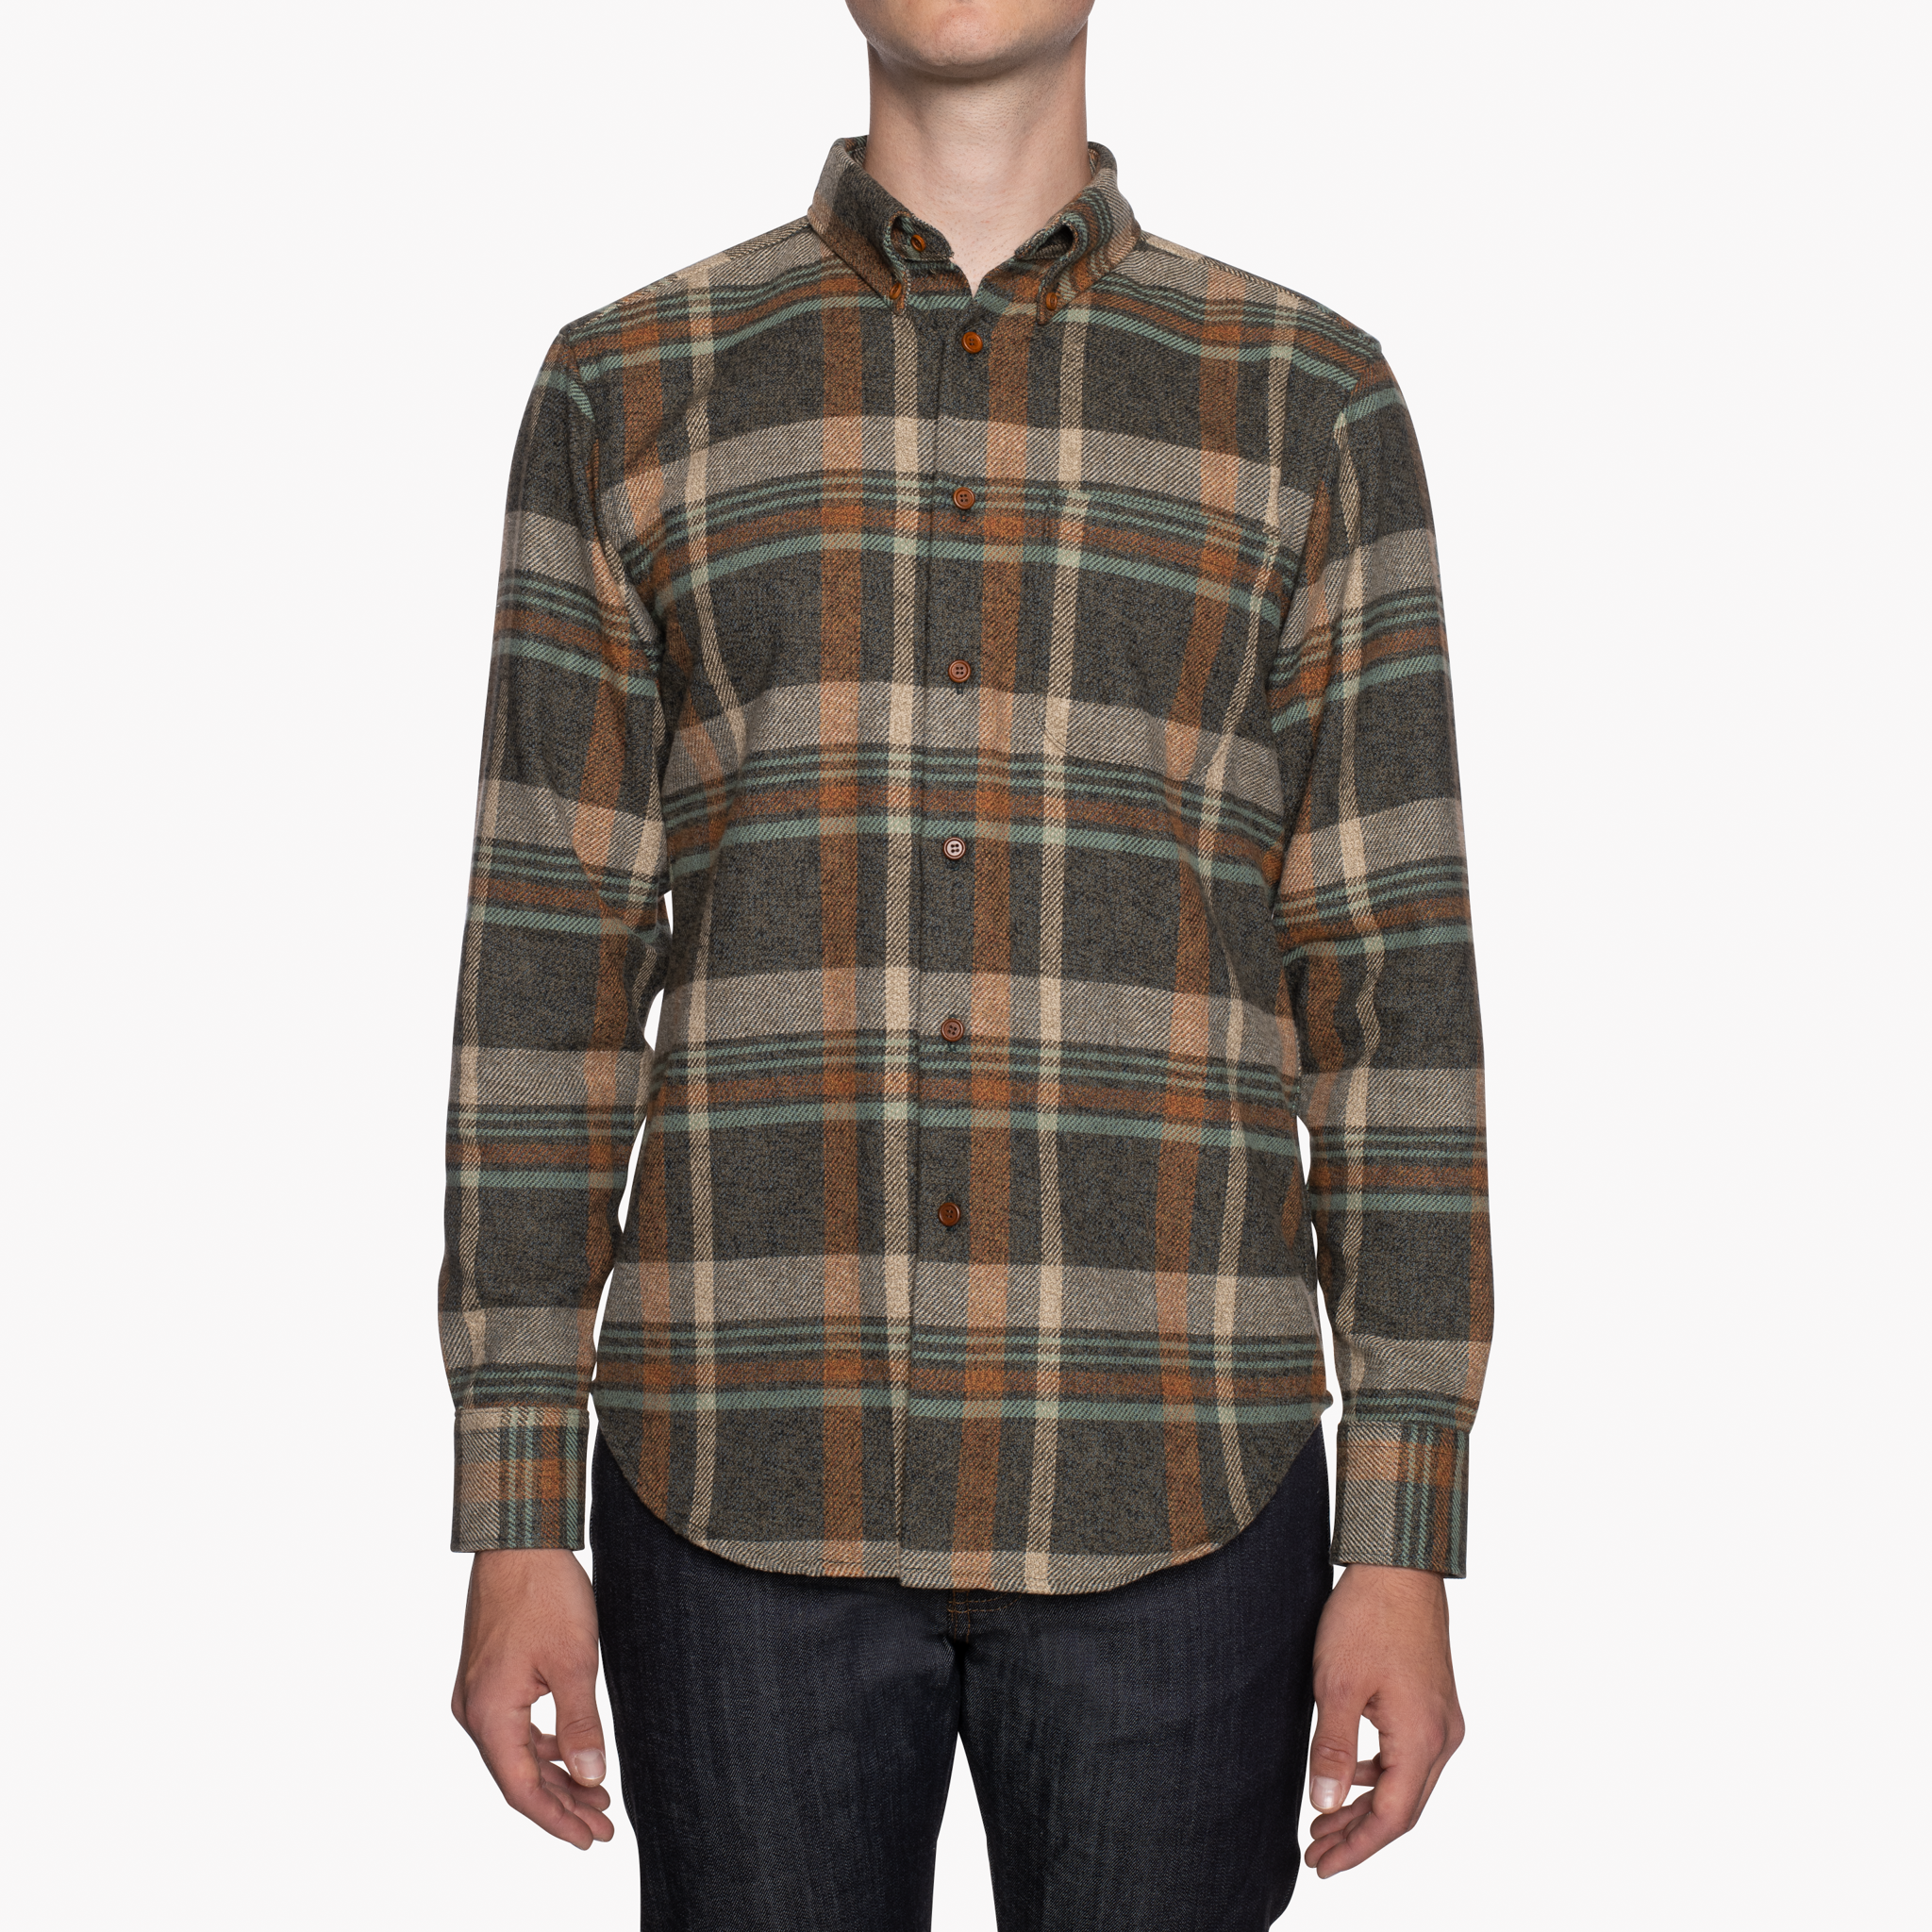  Easy Shirt - Heavy Vintage Flannel - Blue/Rust - Front 